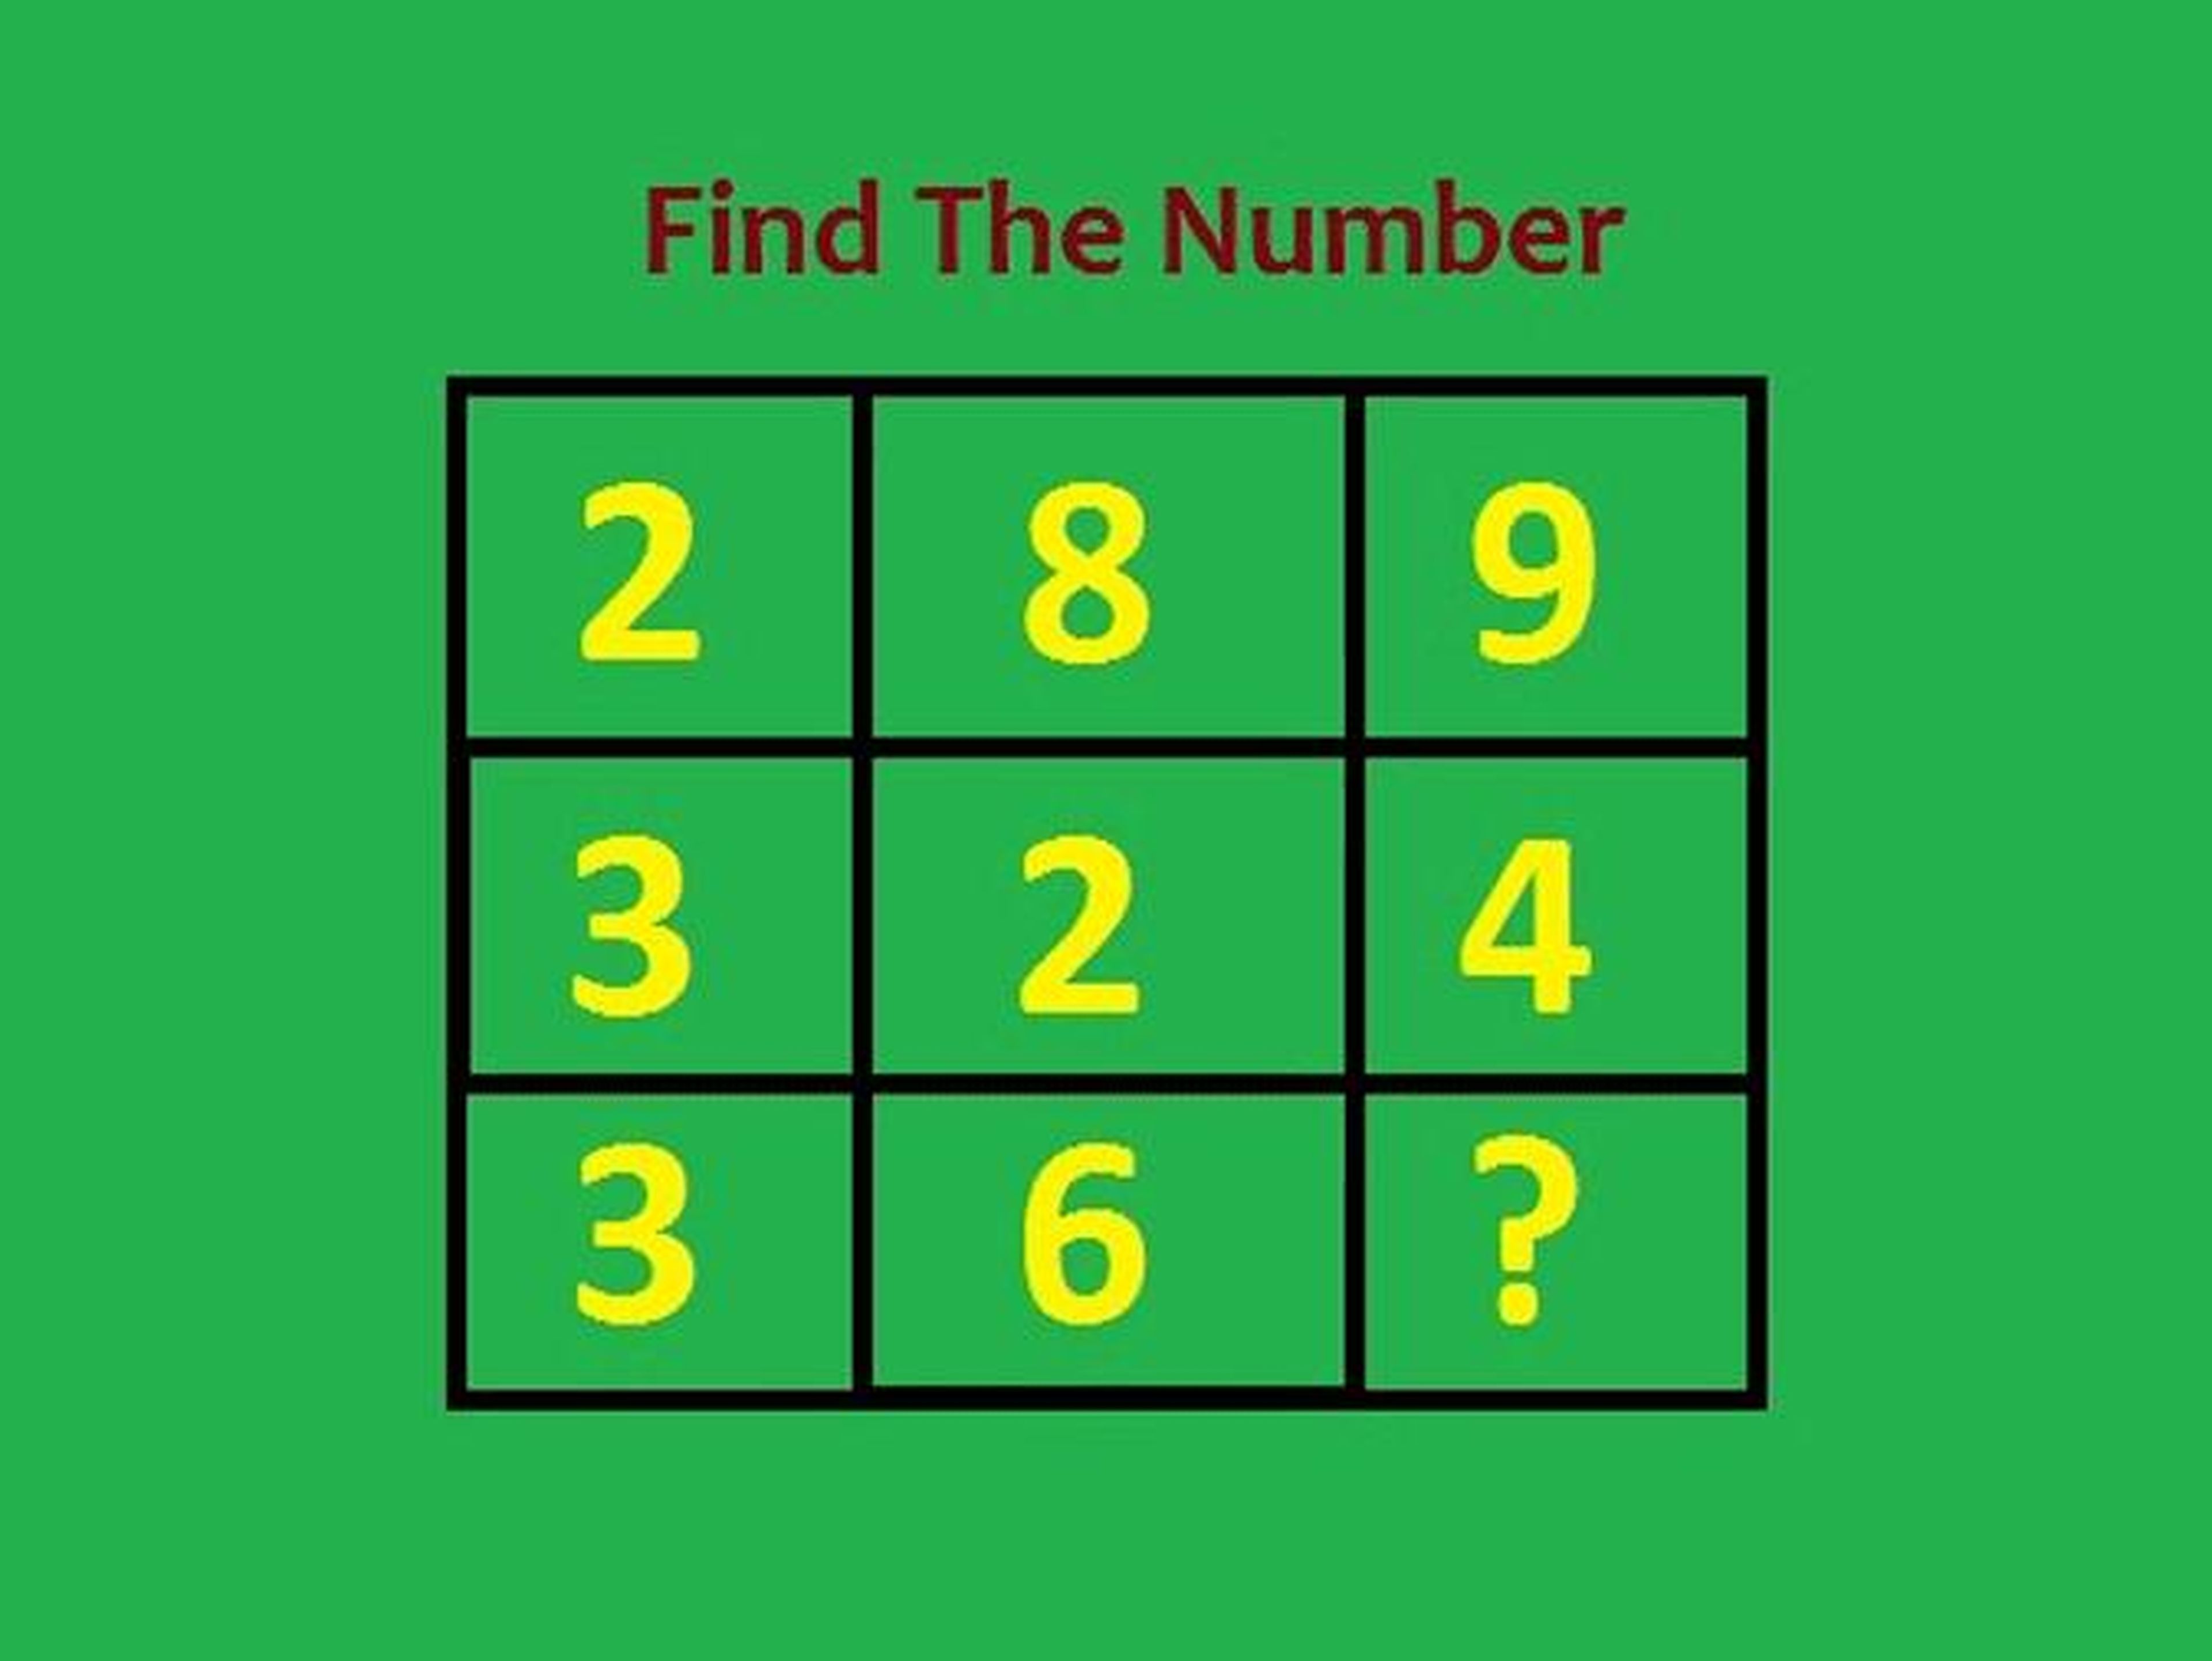 What is the missing number?